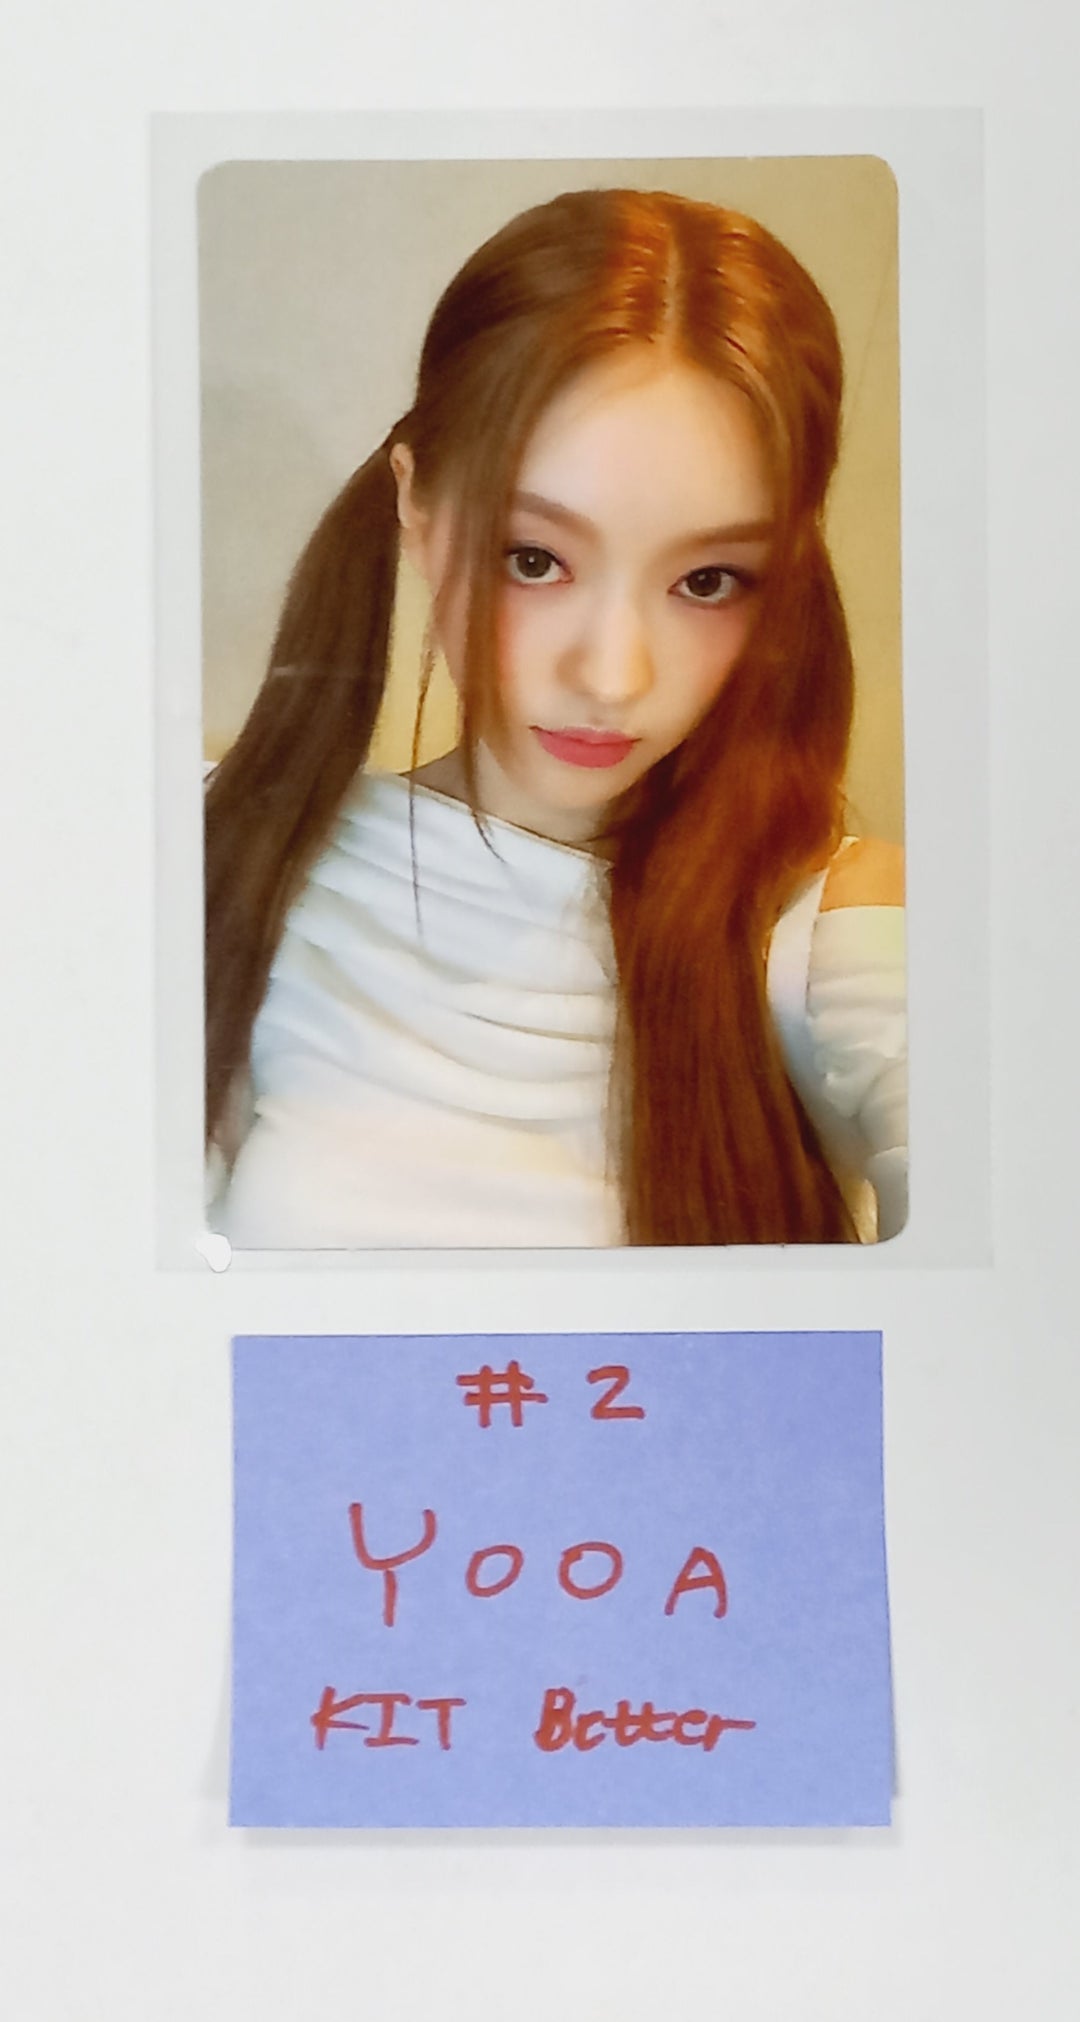 YOOA (Of Oh My Girl) "Borderline" - Kit Better Fansign Event Photocard Round 2 [Kit Ver.] [24.3.29]